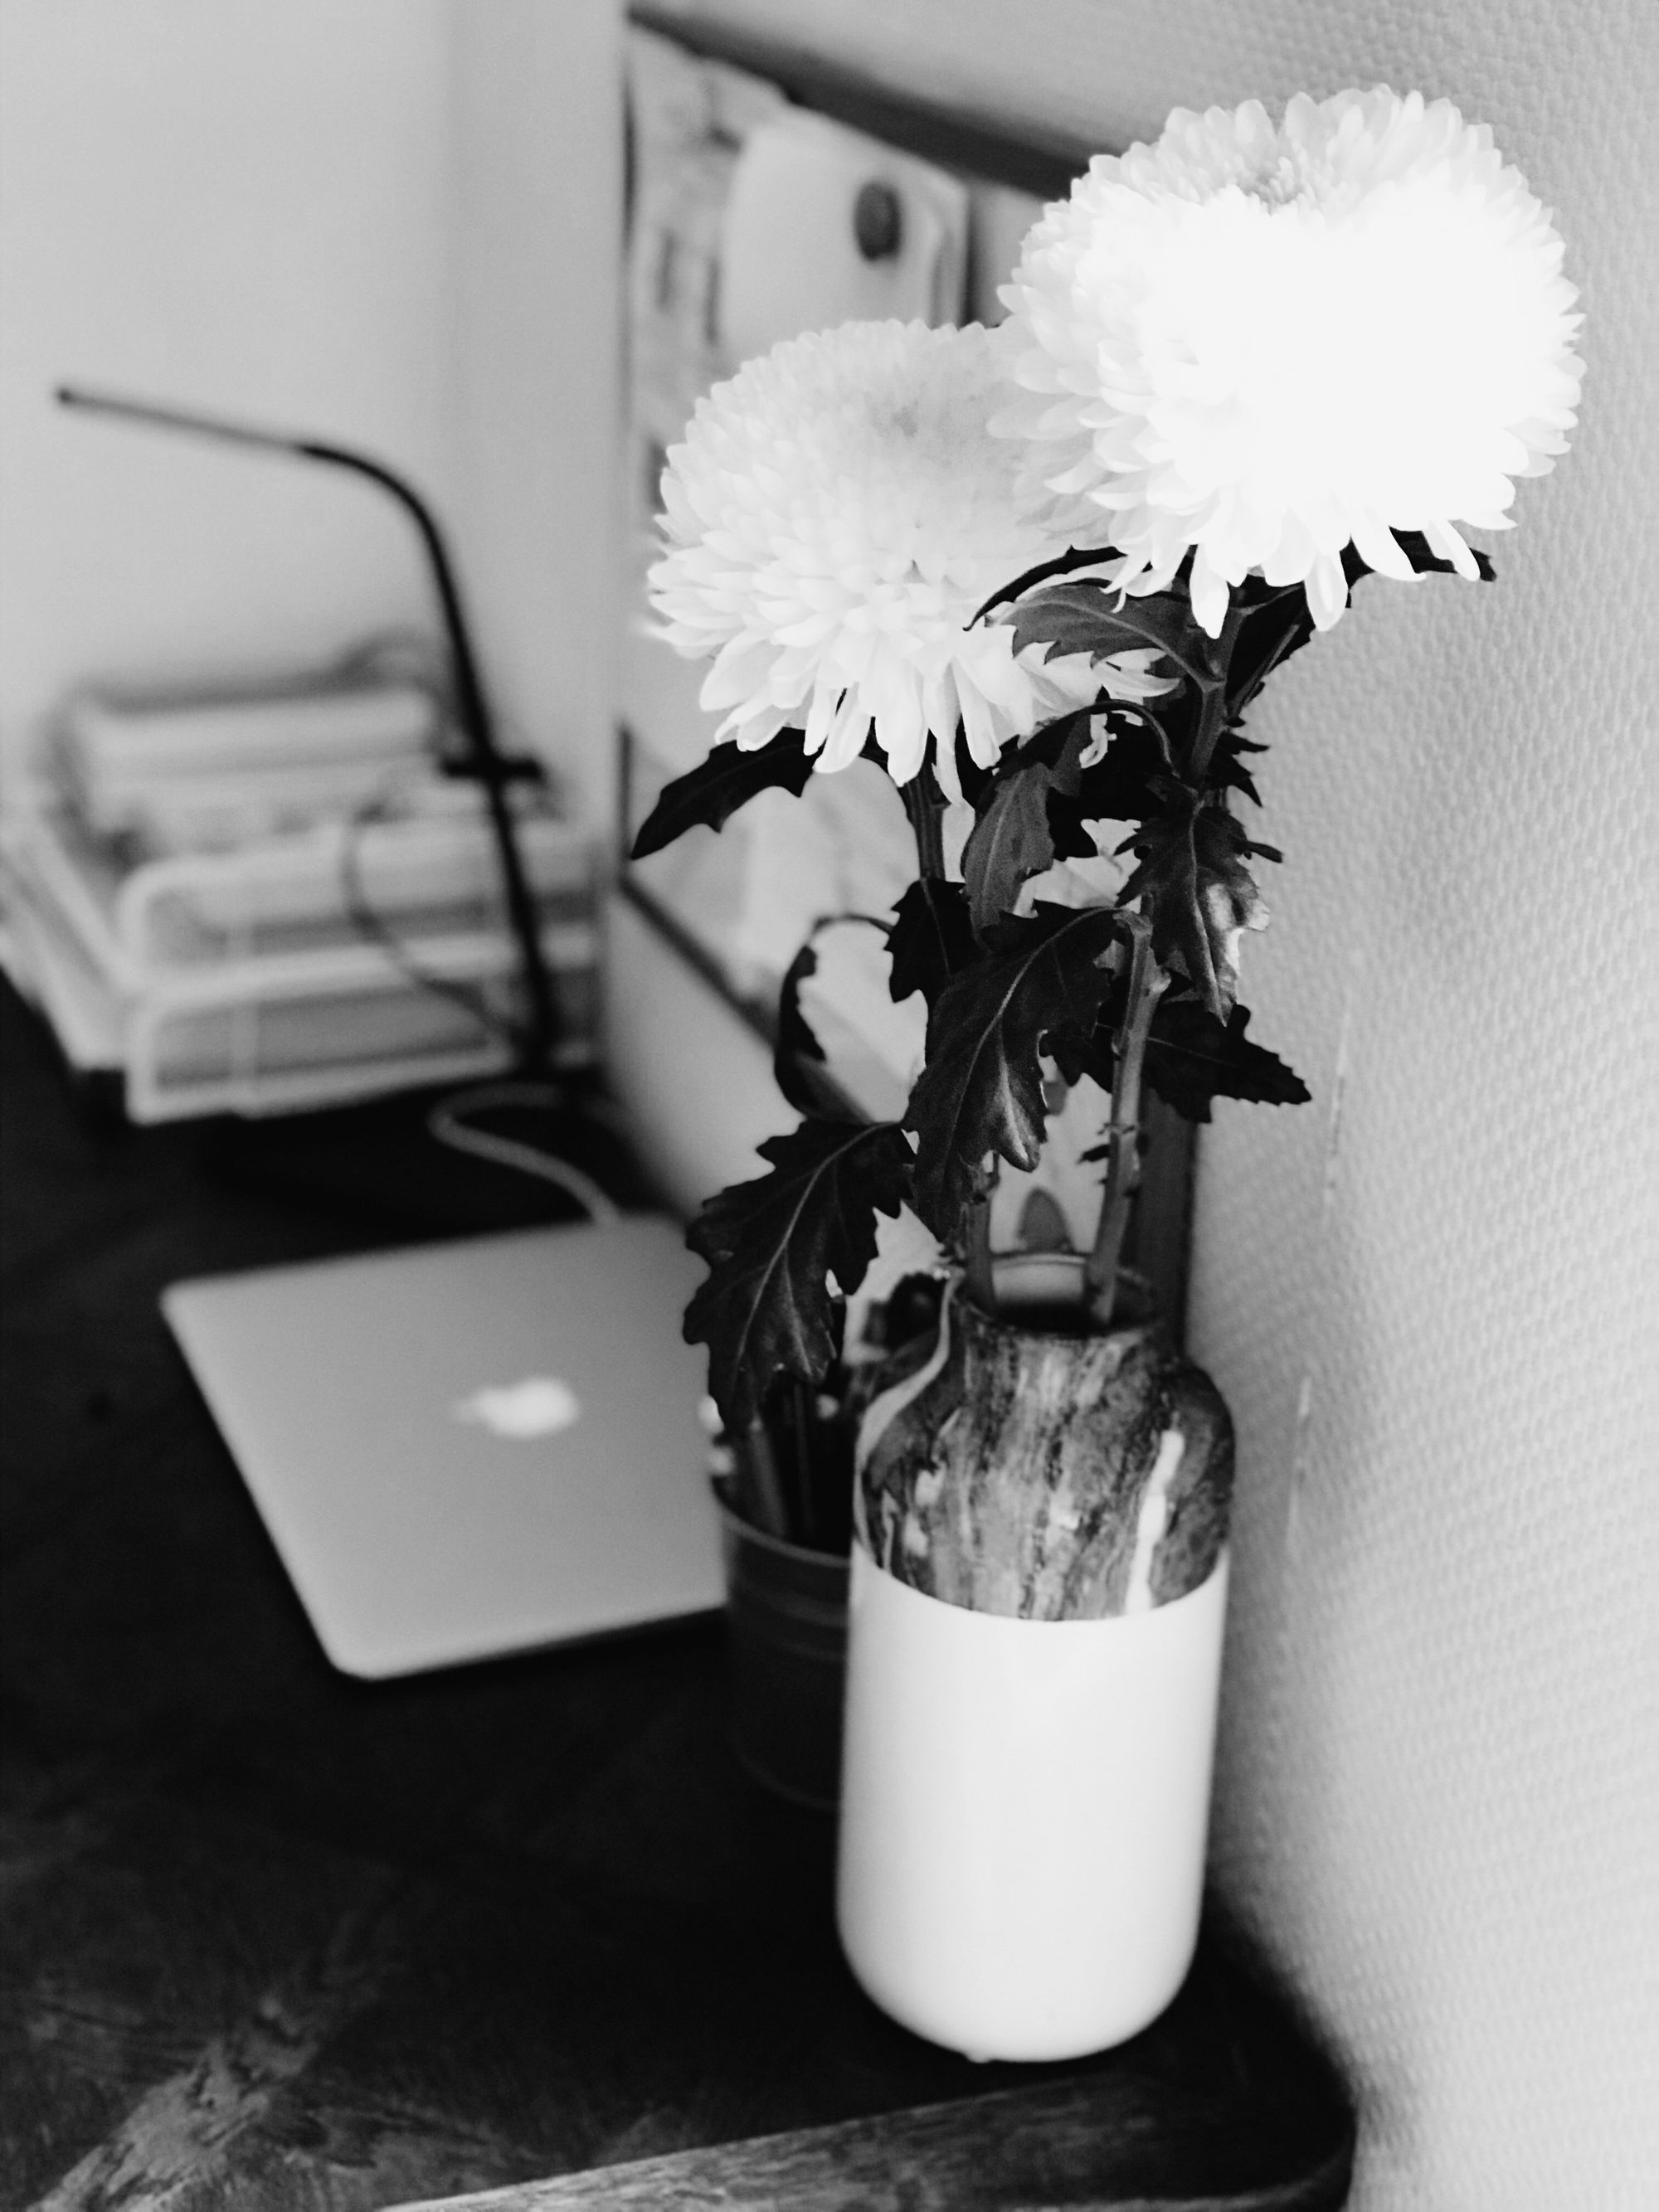 A table with some flowers and a MacBook.